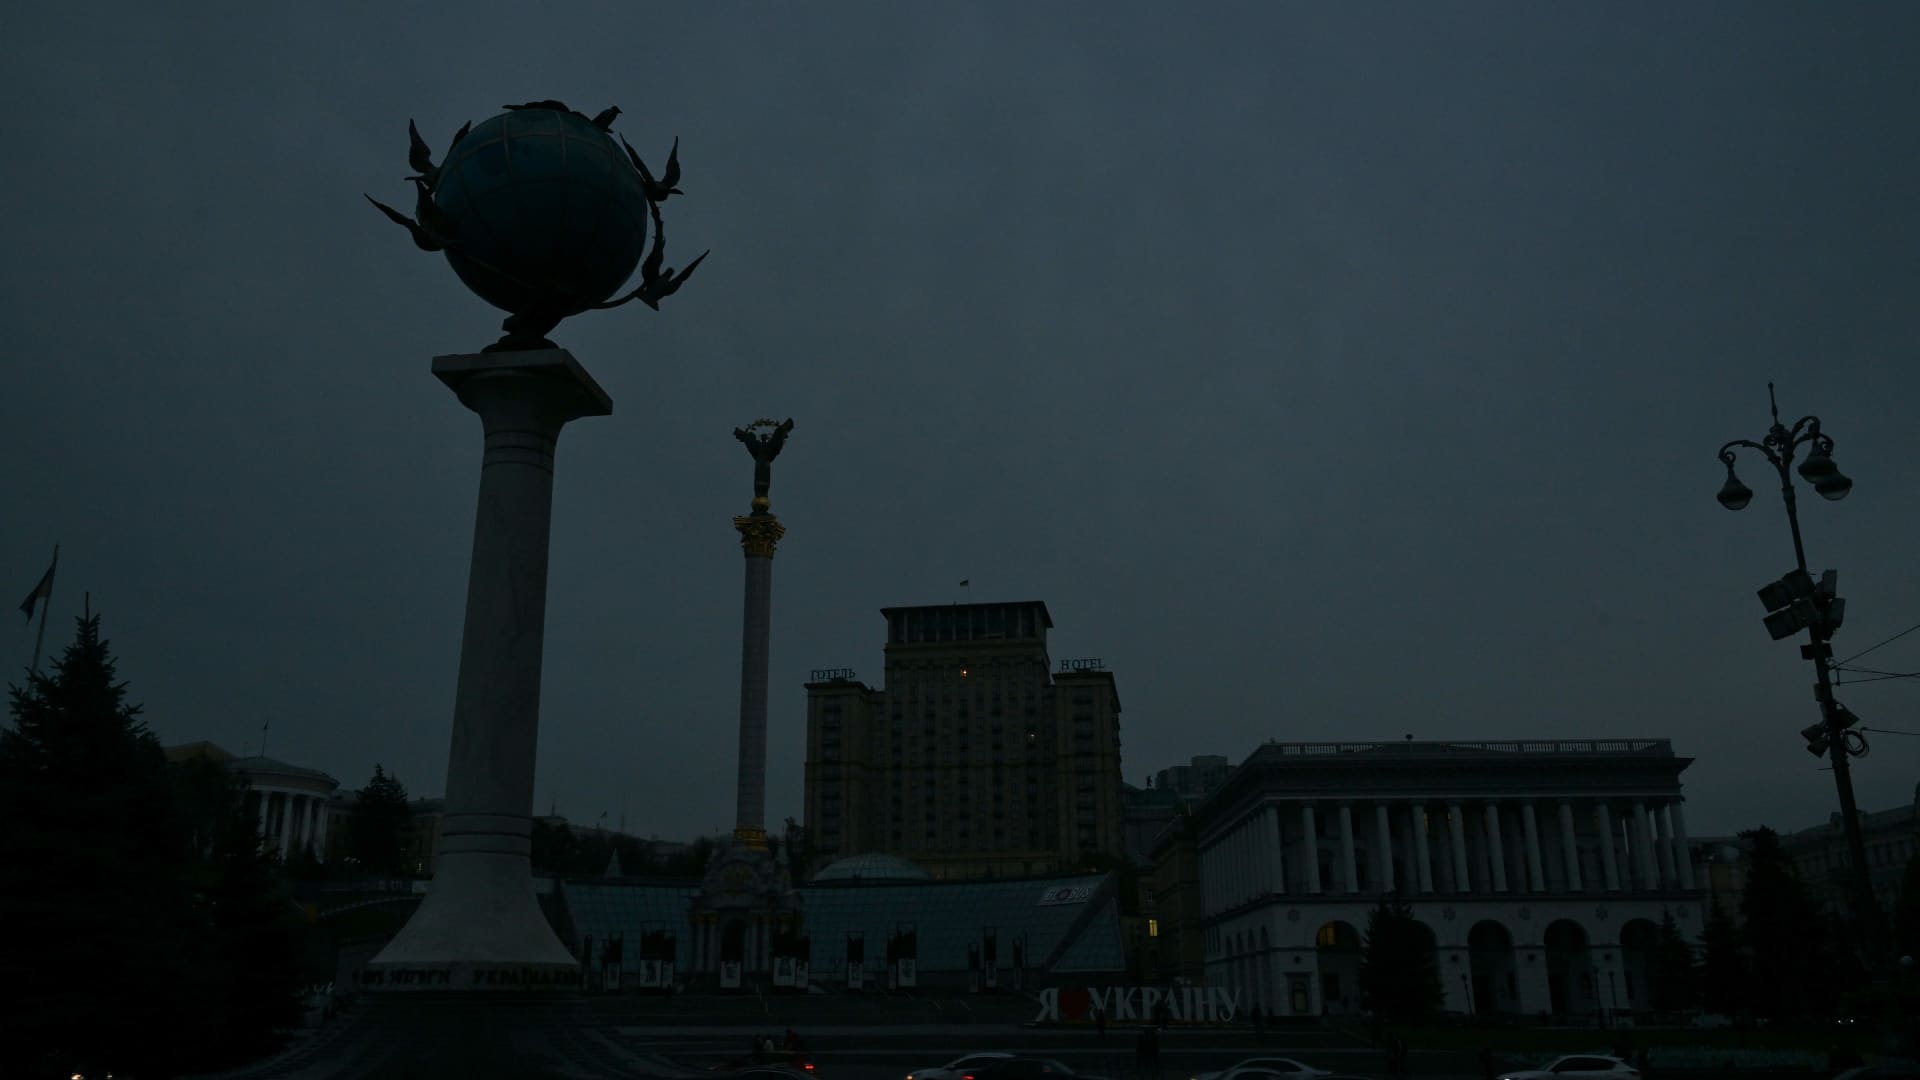 Independence Square in Kyiv during a rolling blackout of parts of districts of the Ukrainian capital following rocket attacks to critical infrastructure, on Oct. 24, 2022.